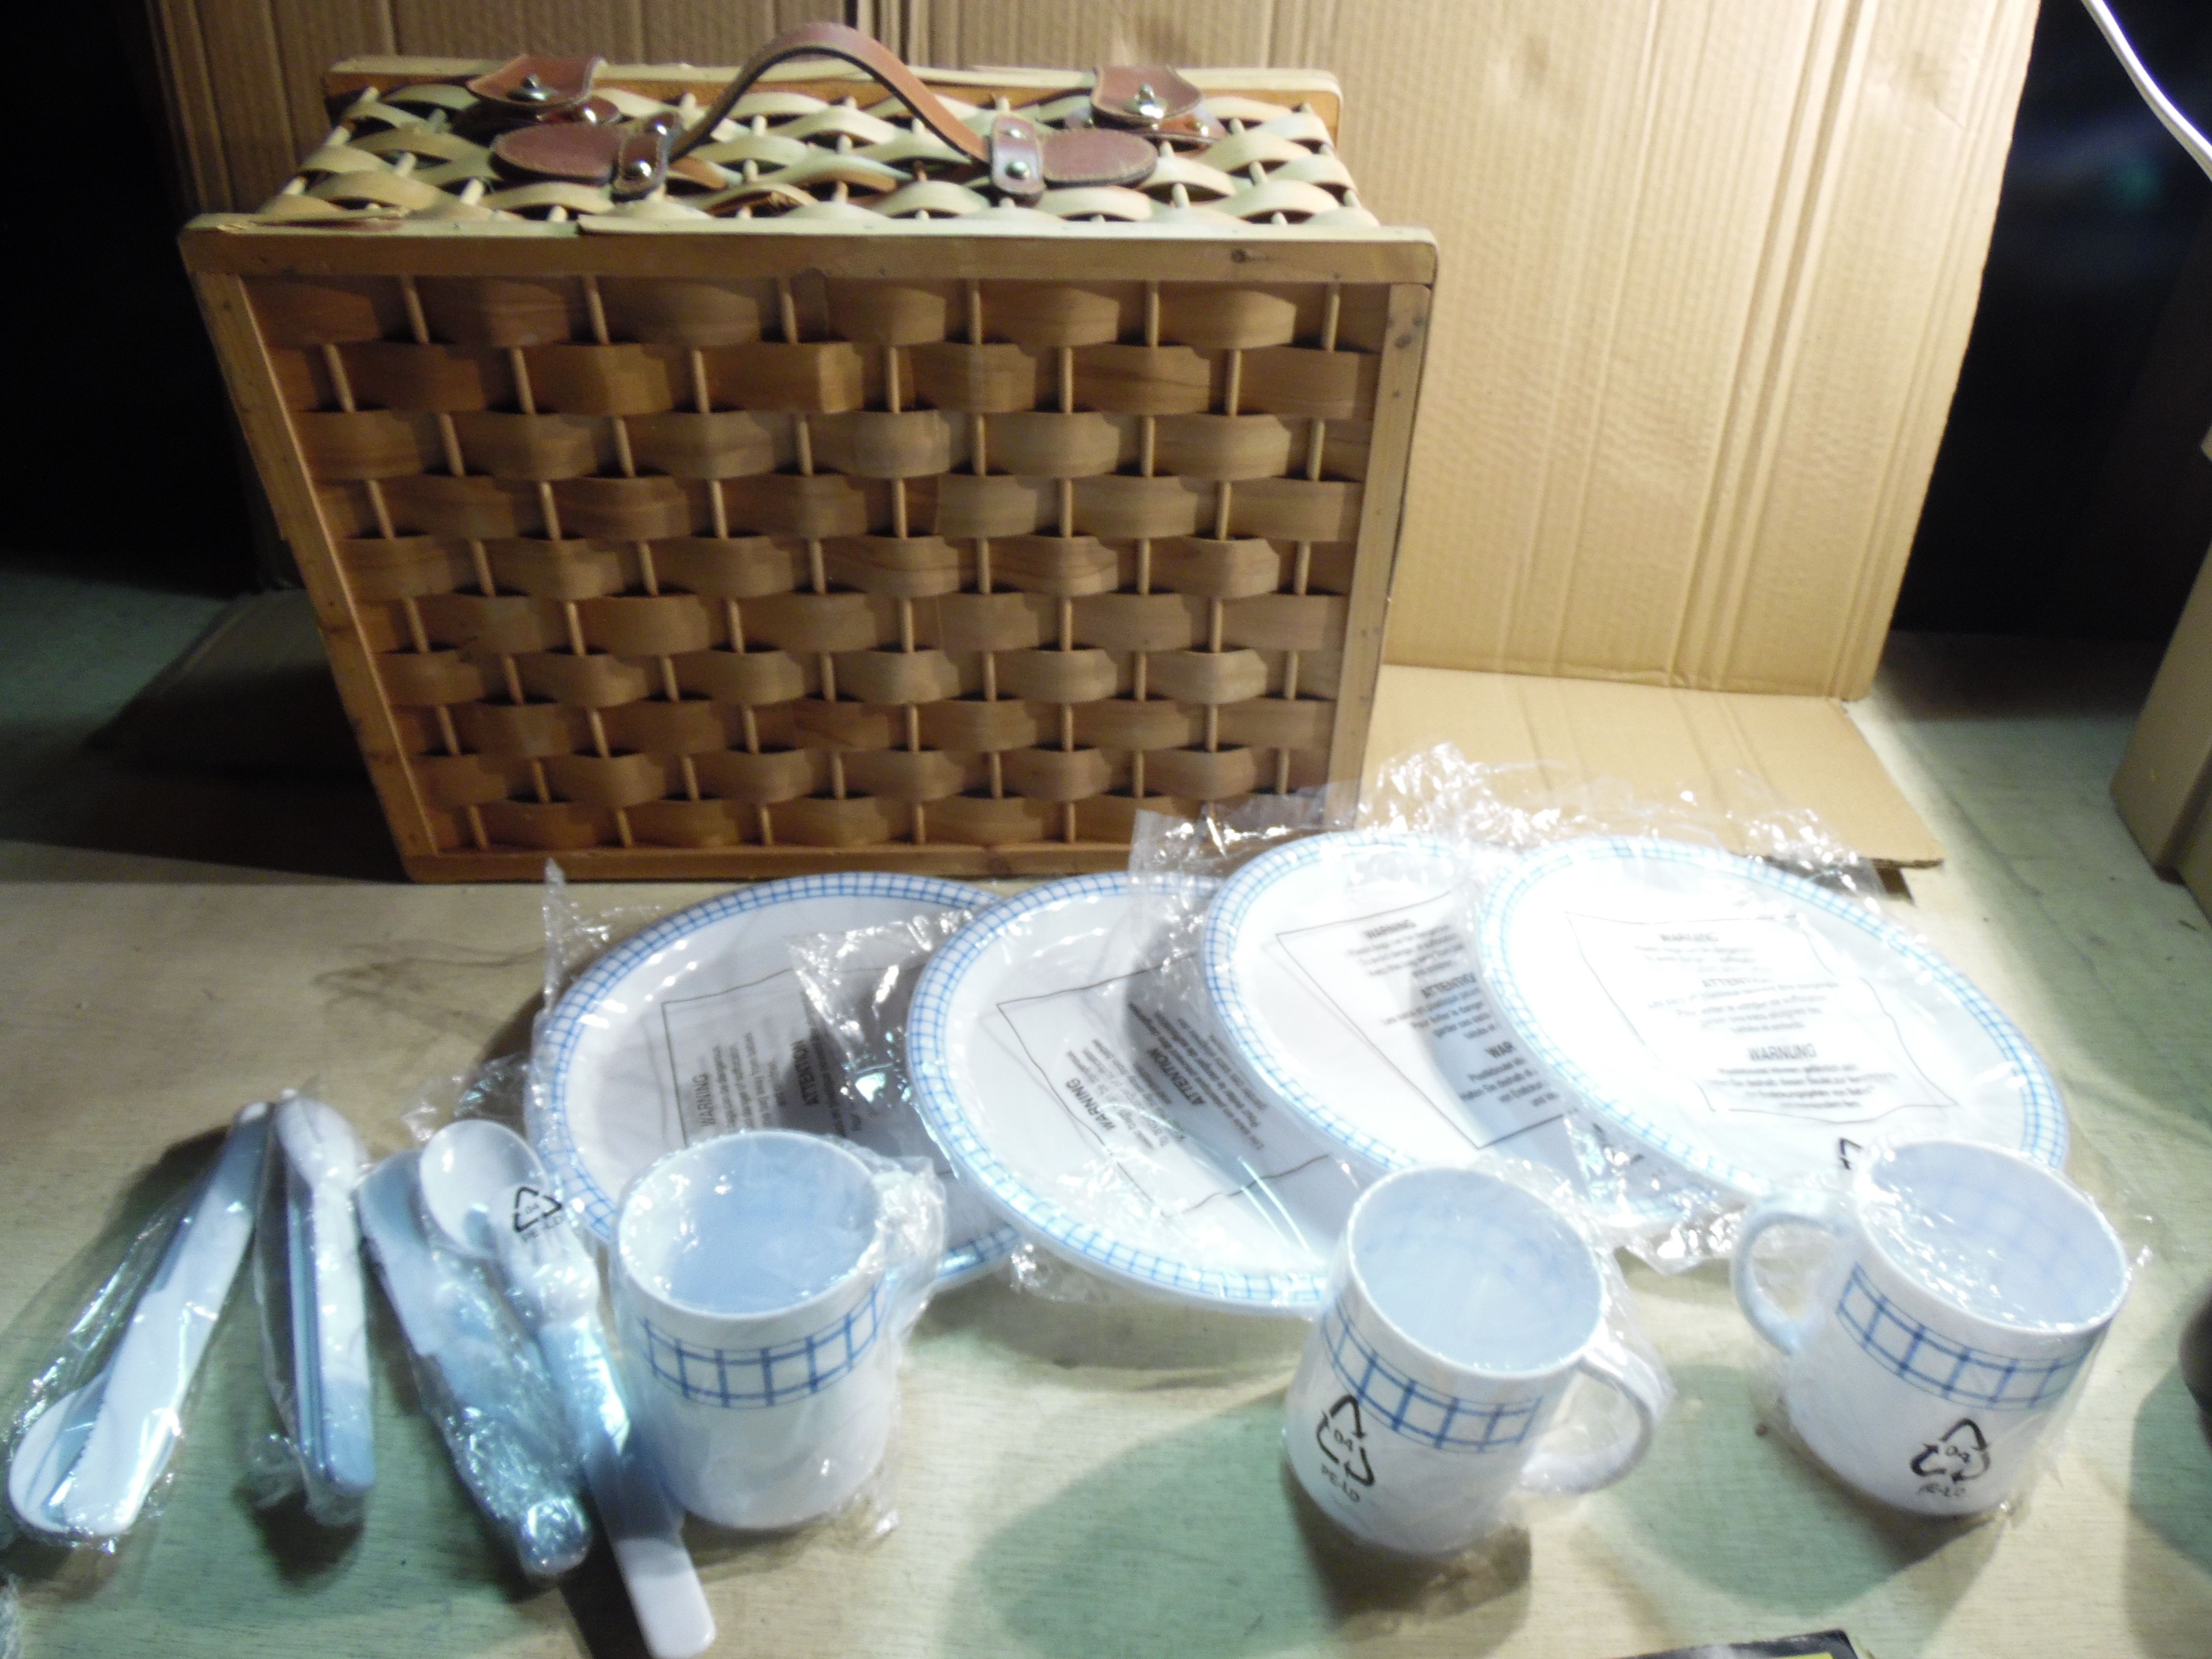 Wicker Picnic Basket 4 Person Setting. Cups Plates Spoons Knives & Forks. NOS. DAMAGED